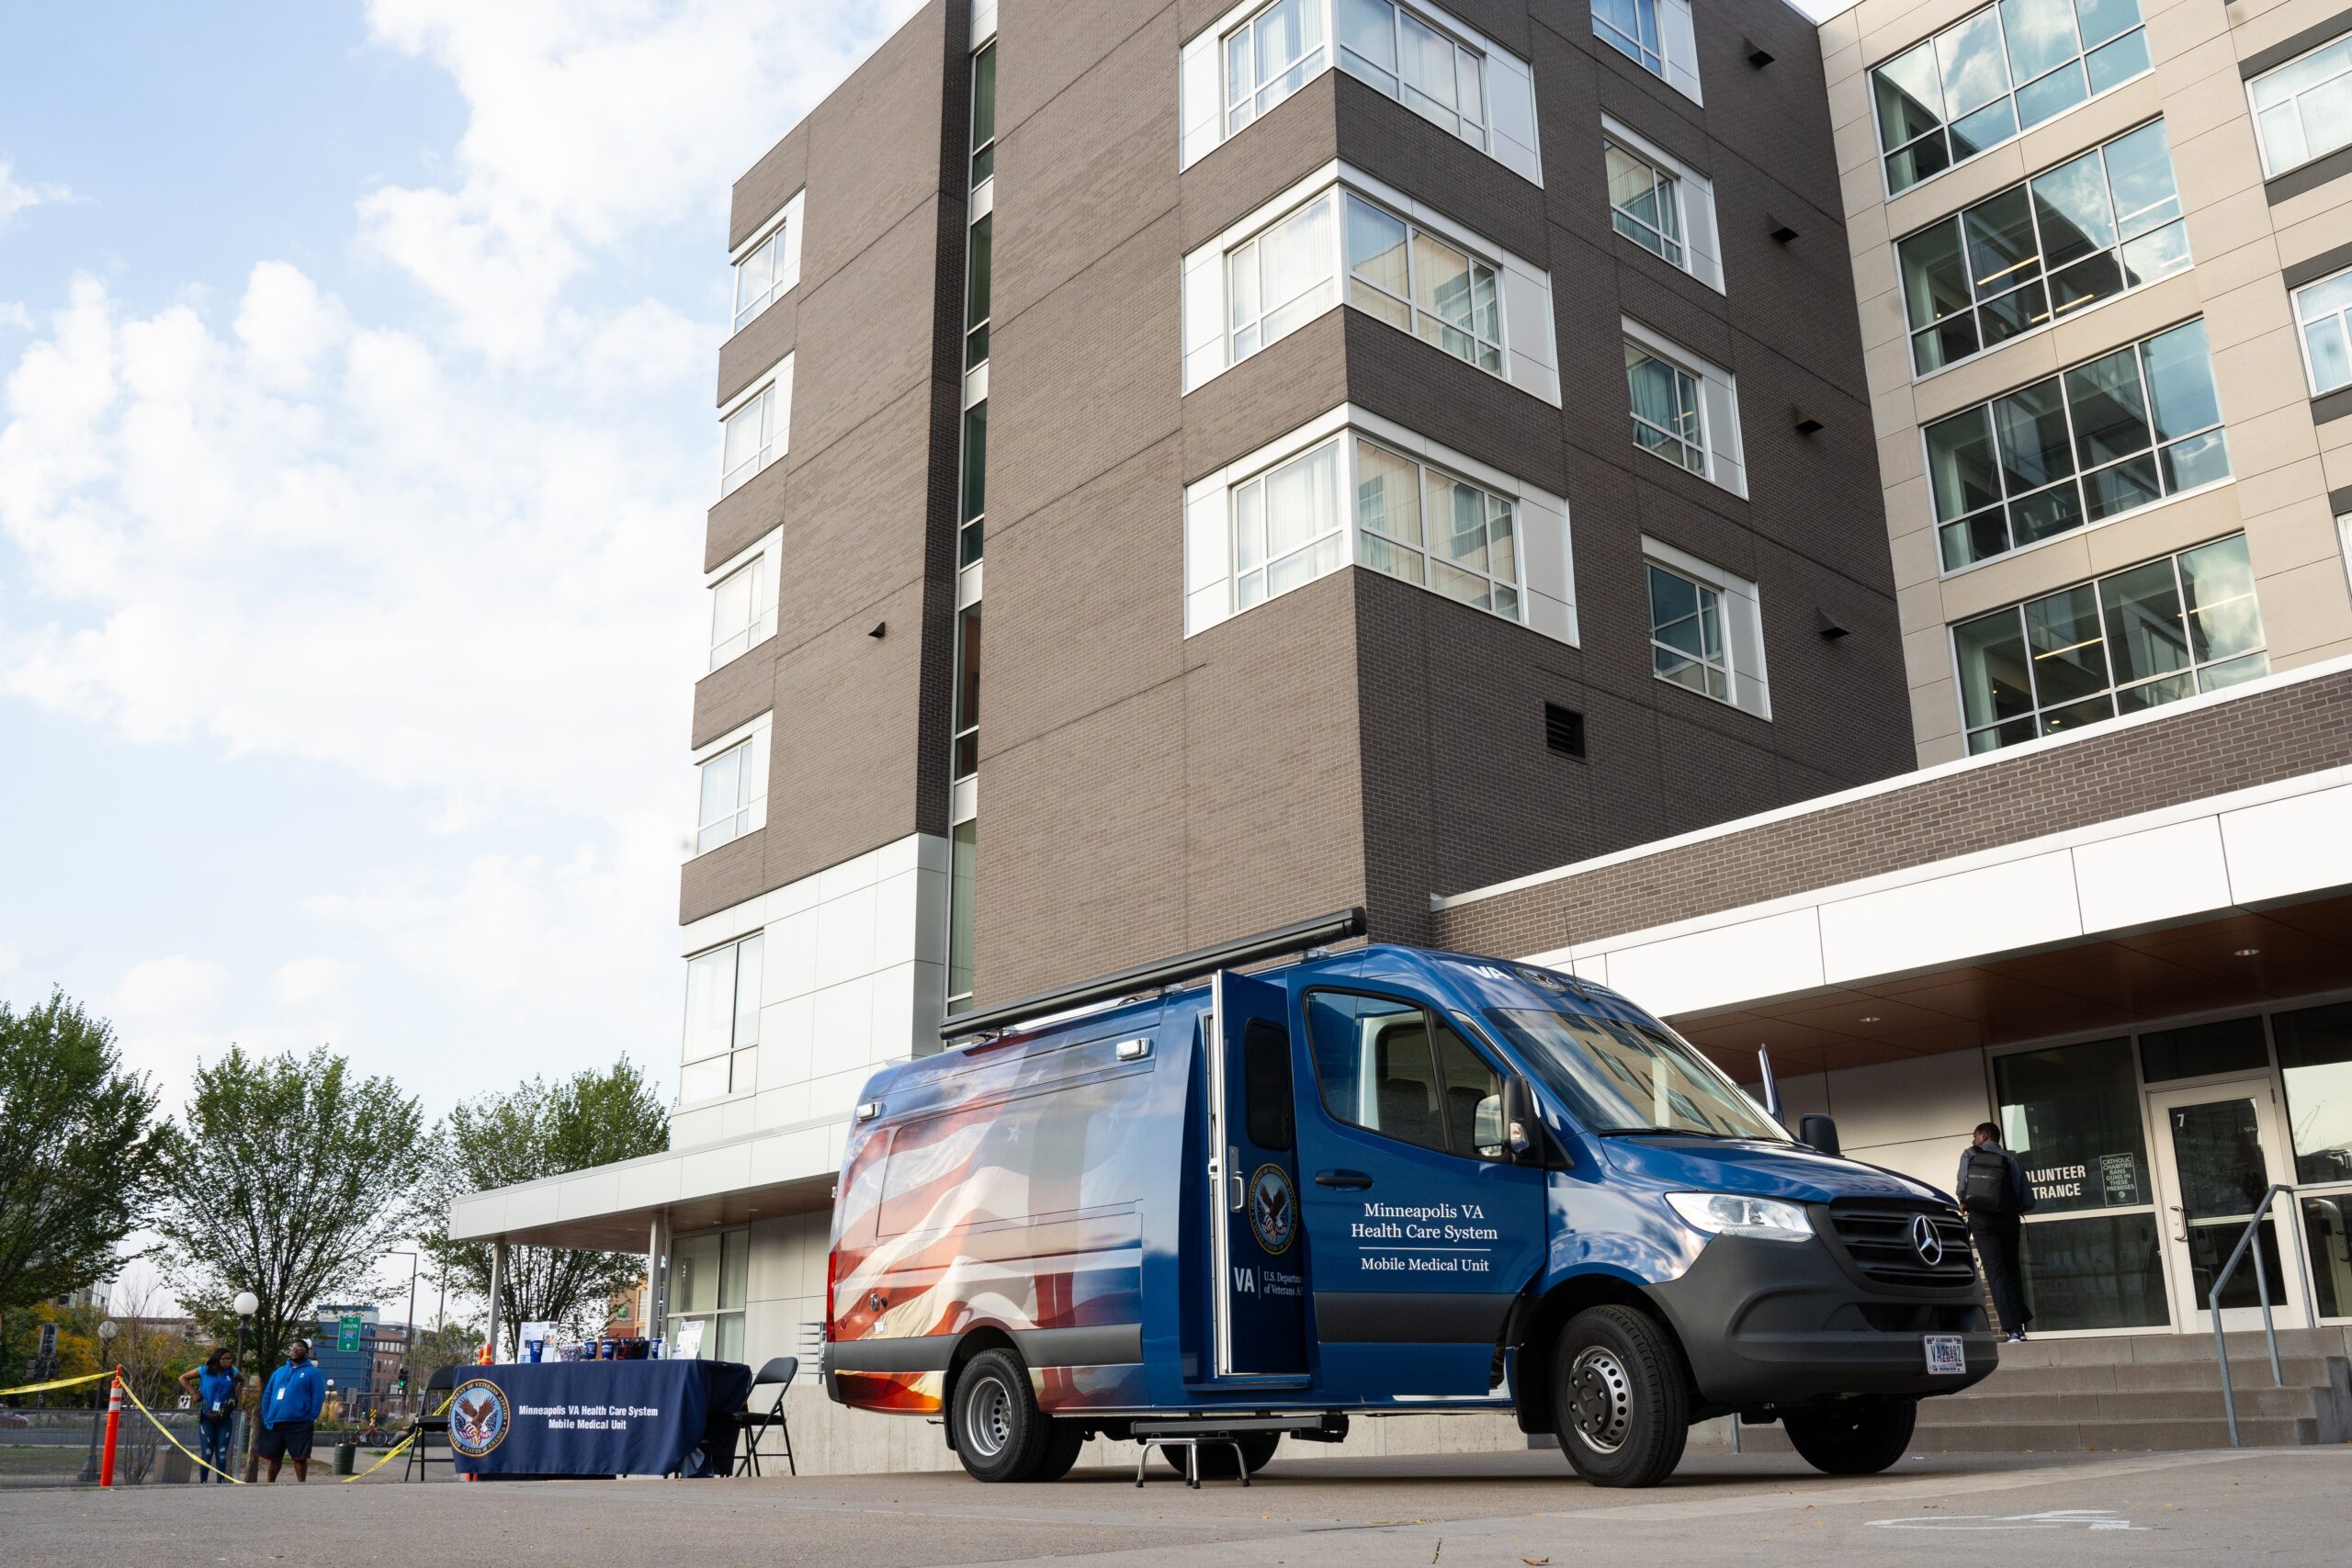 A new mobile medical unit provided by the U.S. Department of Veterans Affairs, seen in an undated photo, sits outside the campus of Catholic Charities Twin Cities' Dorothy Day Center in St. Paul, Minn. The MMU contains medical supplies and equipment to assist veterans experiencing homelessness. (OSV News photo/courtesy Catholic Charities Twin Cities)